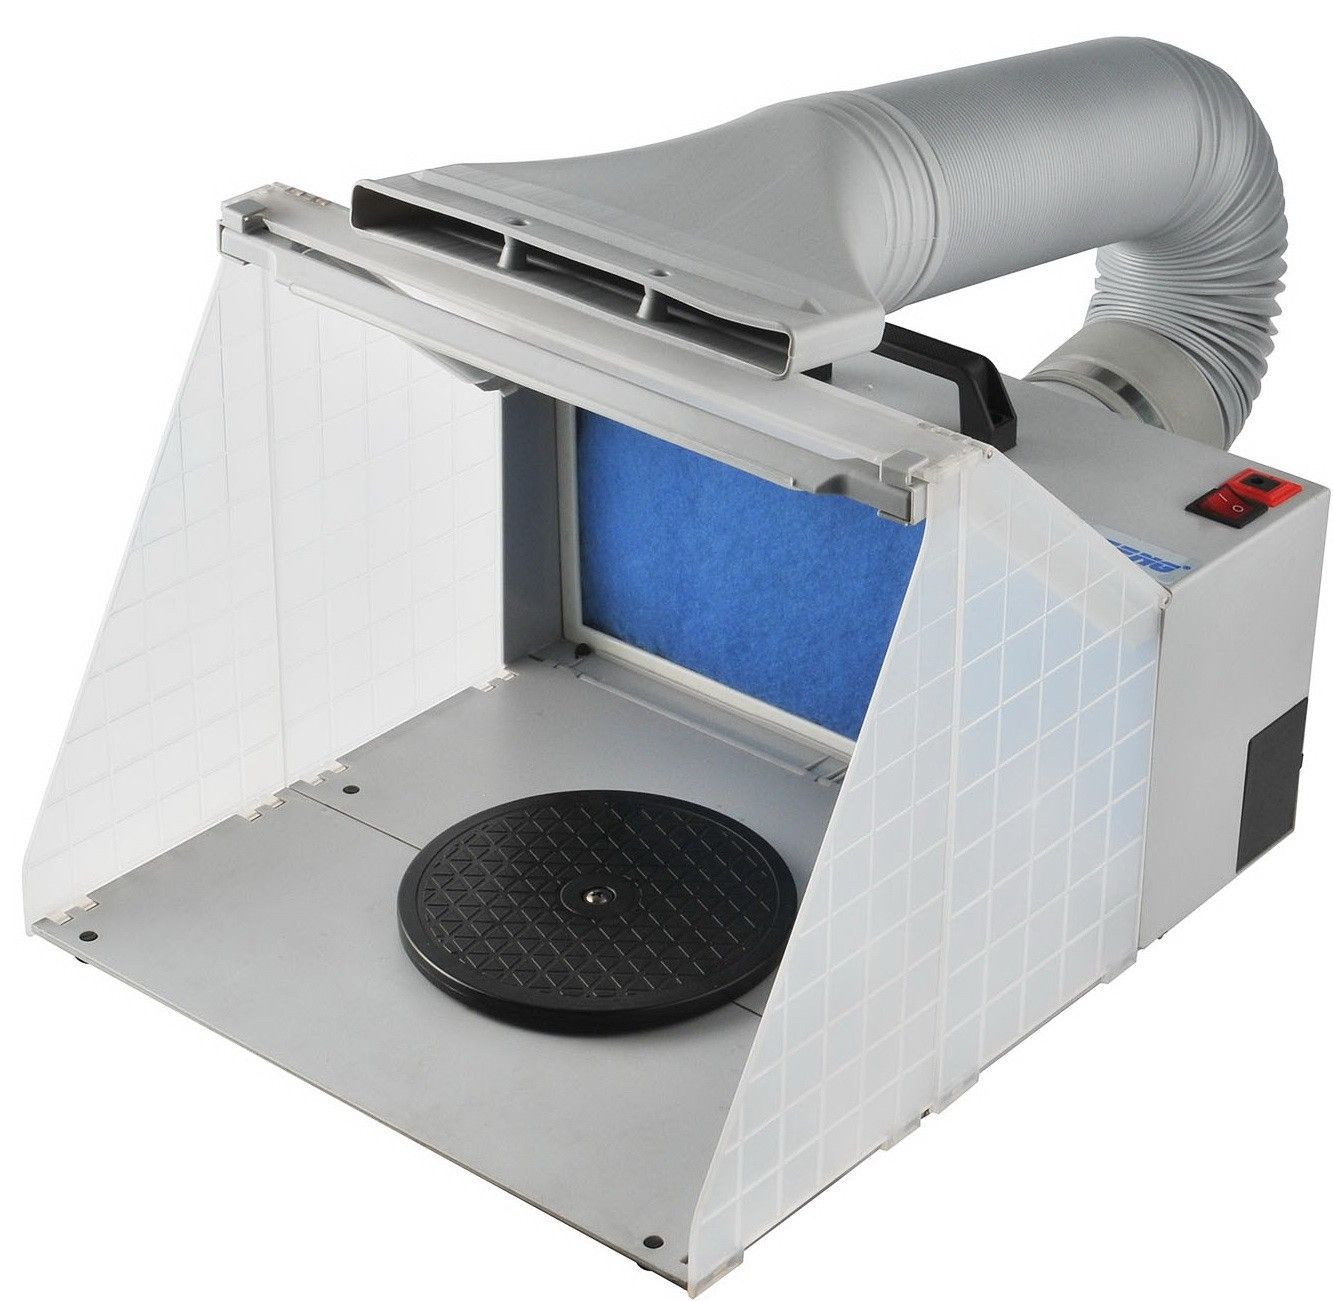 Airbrush extractor/spray booth with LED light and hose - Click Image to Close